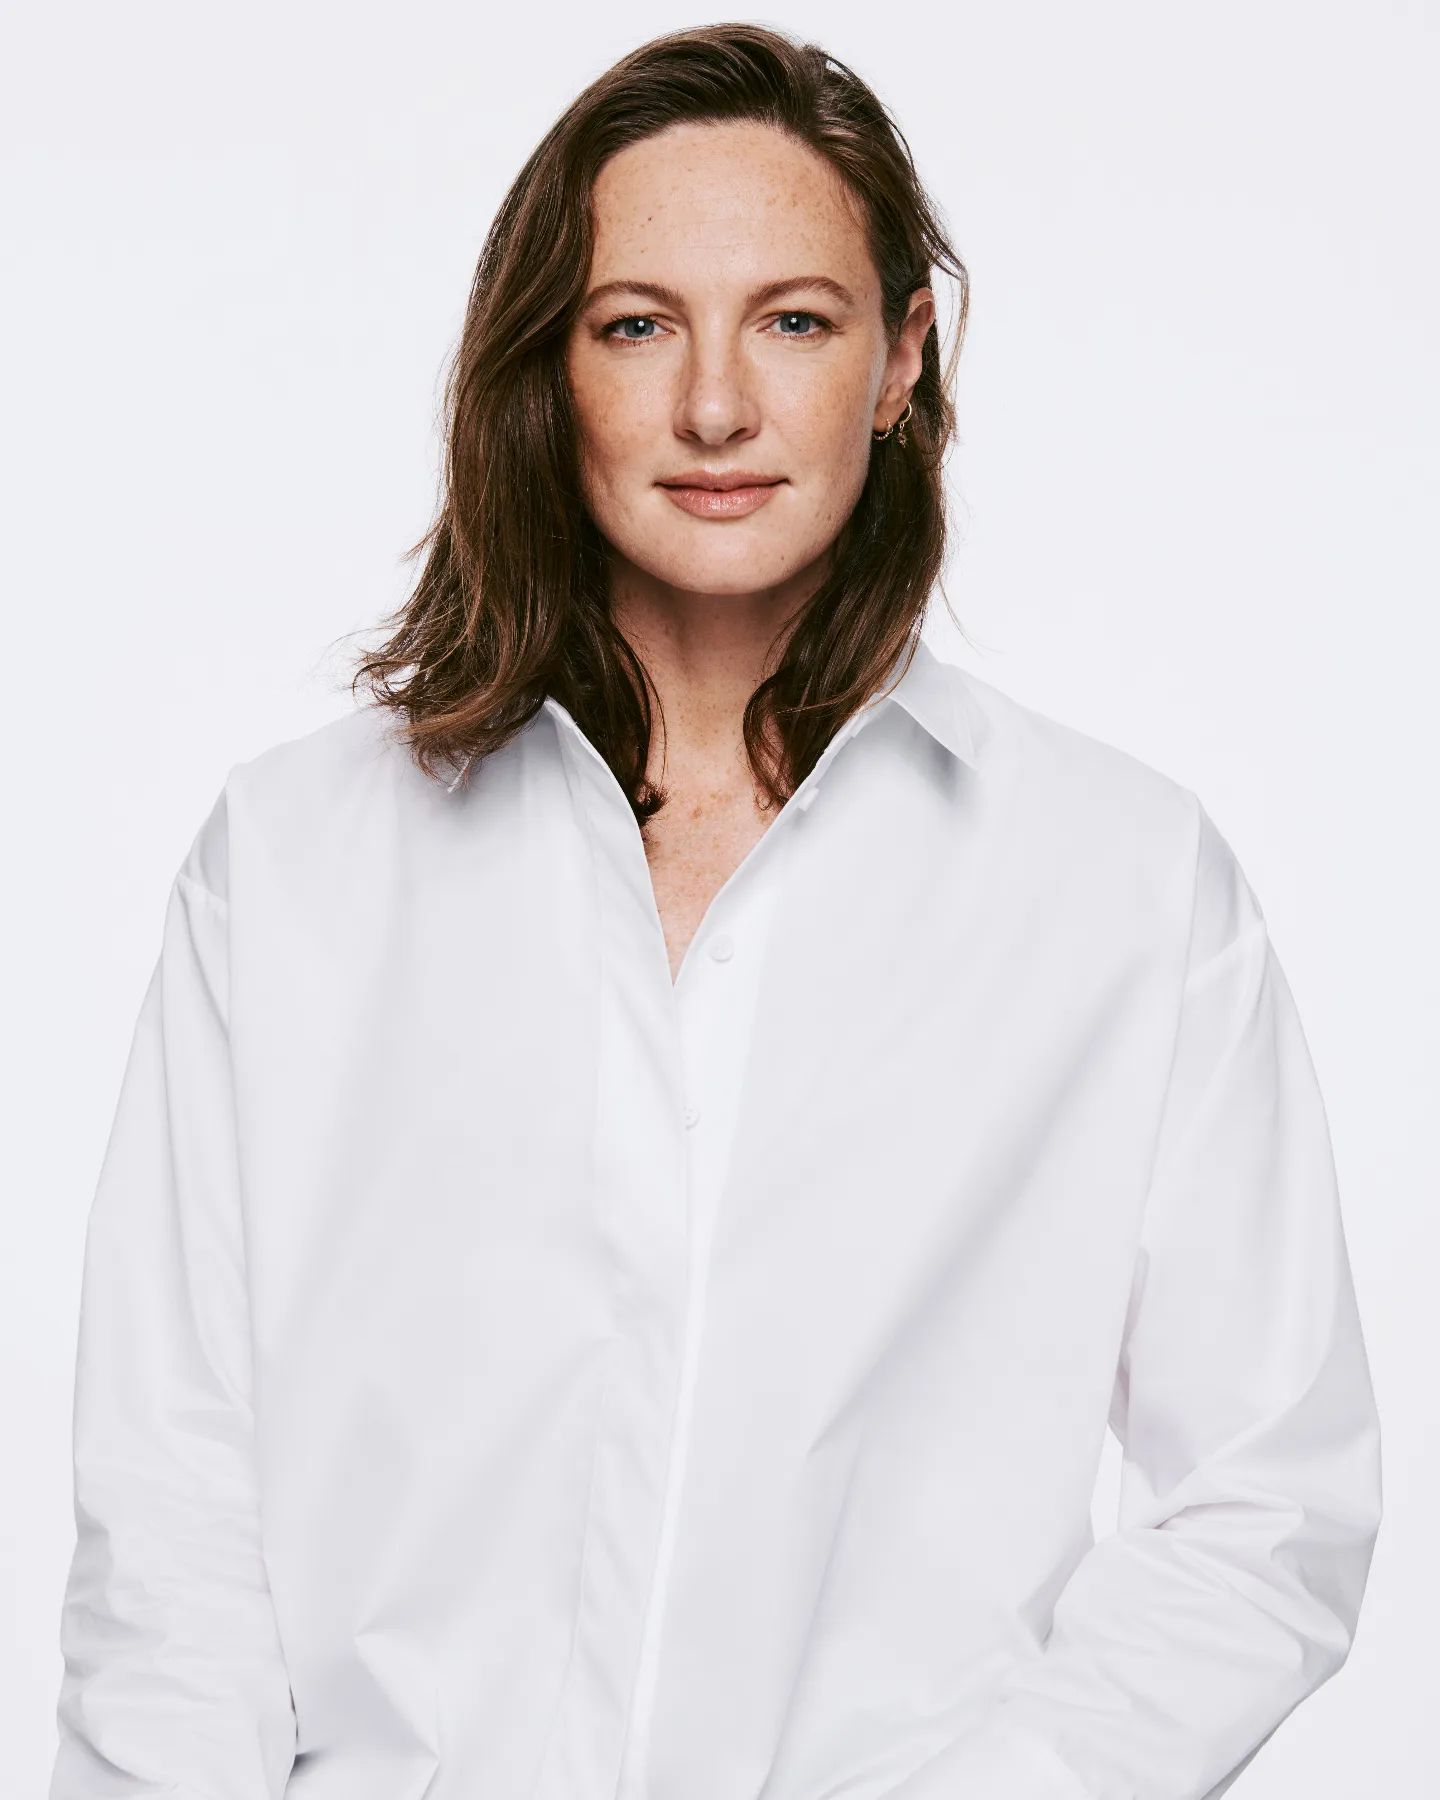 Cate Campbell Biography: Age, Height, Net Worth, Husband, Partner, Parents, Siblings